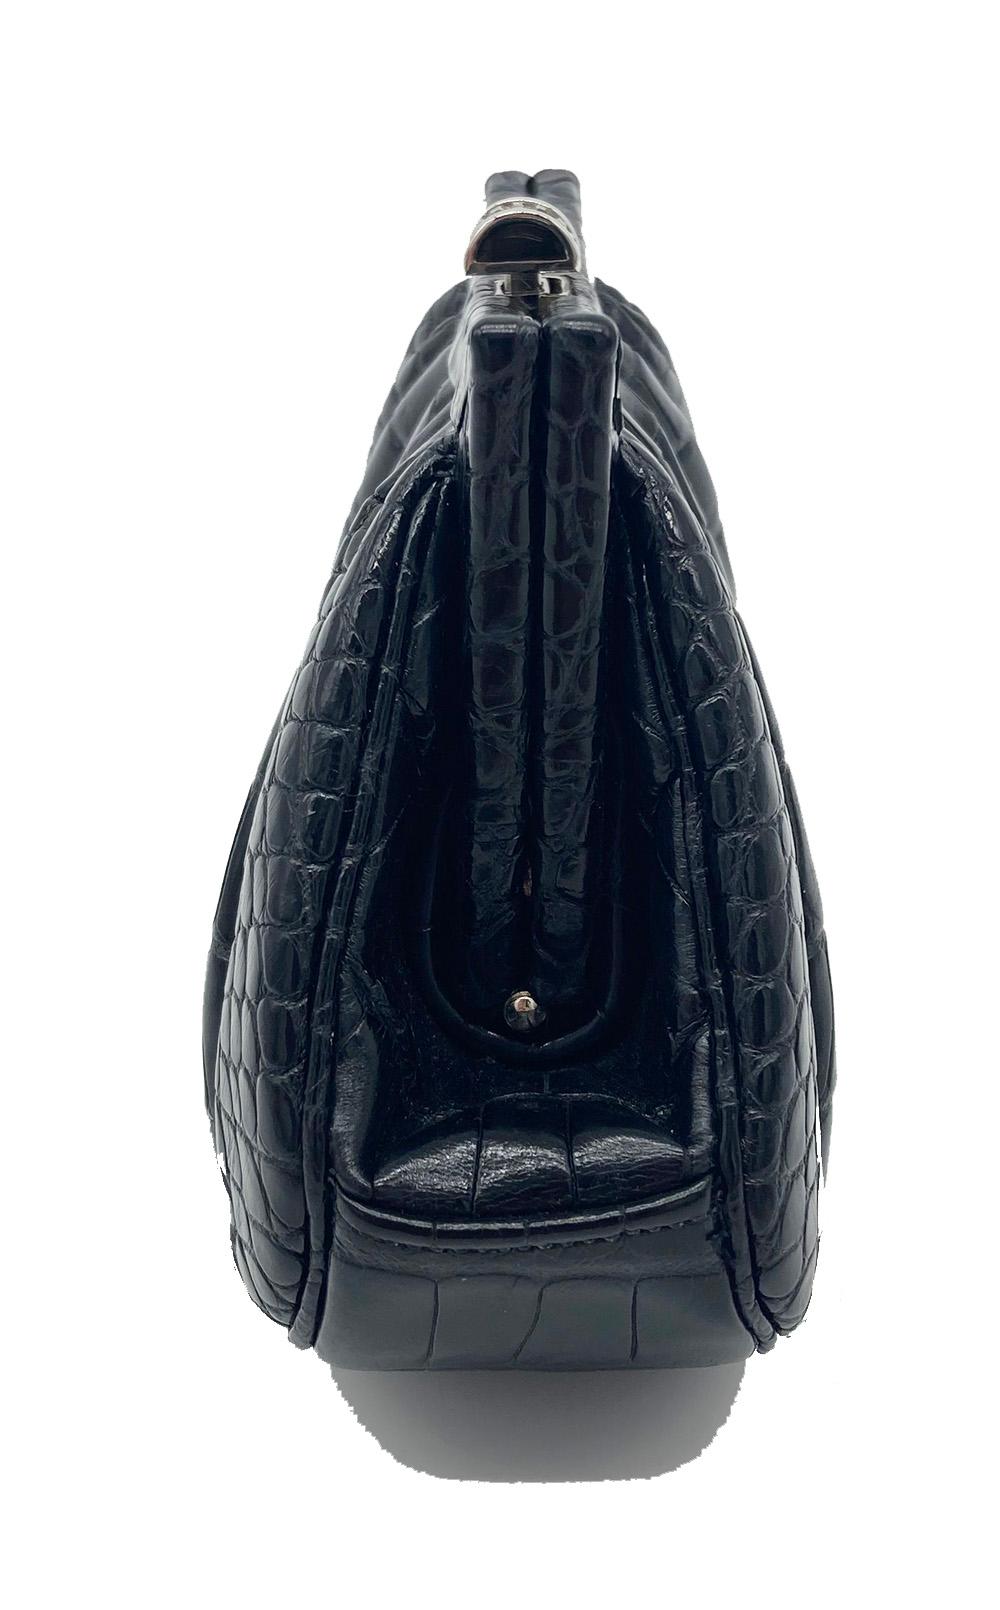 Judith Leiber Black Alligator Mini Evening Bag in excellent condition. Black alligator exterior trimmed with a crystal silver top button closure. Black silk interior with one slit side pocket and removable silver chain shoulder strap. no stains